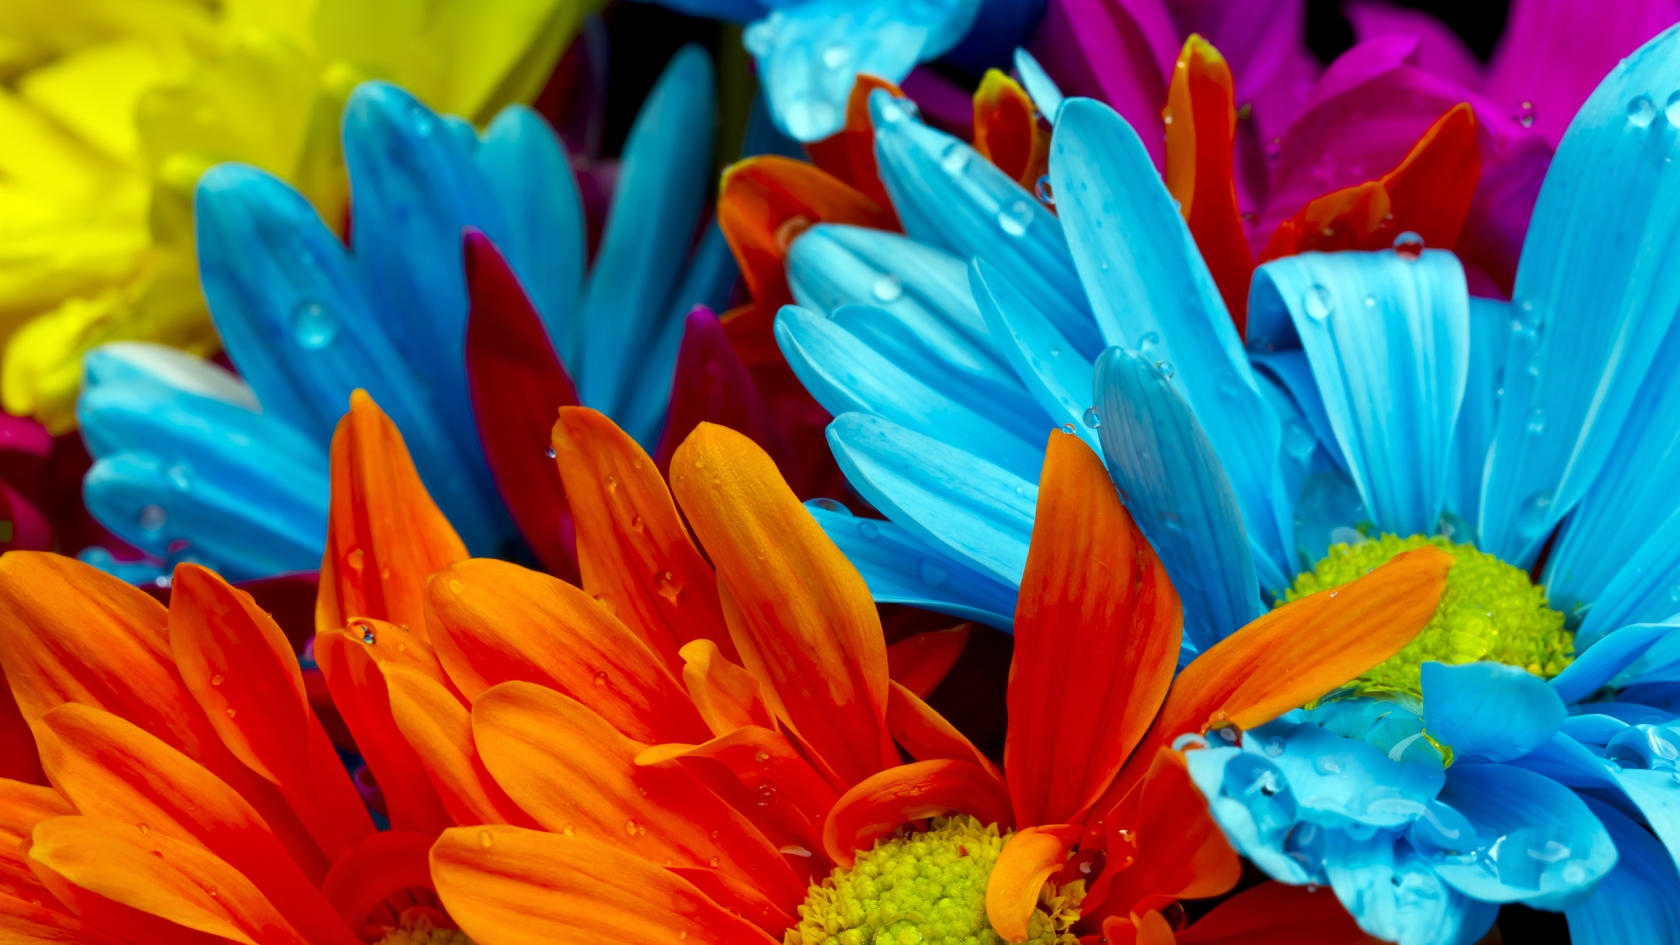 Amazing Flower Colors for 1680 x 945 HDTV resolution